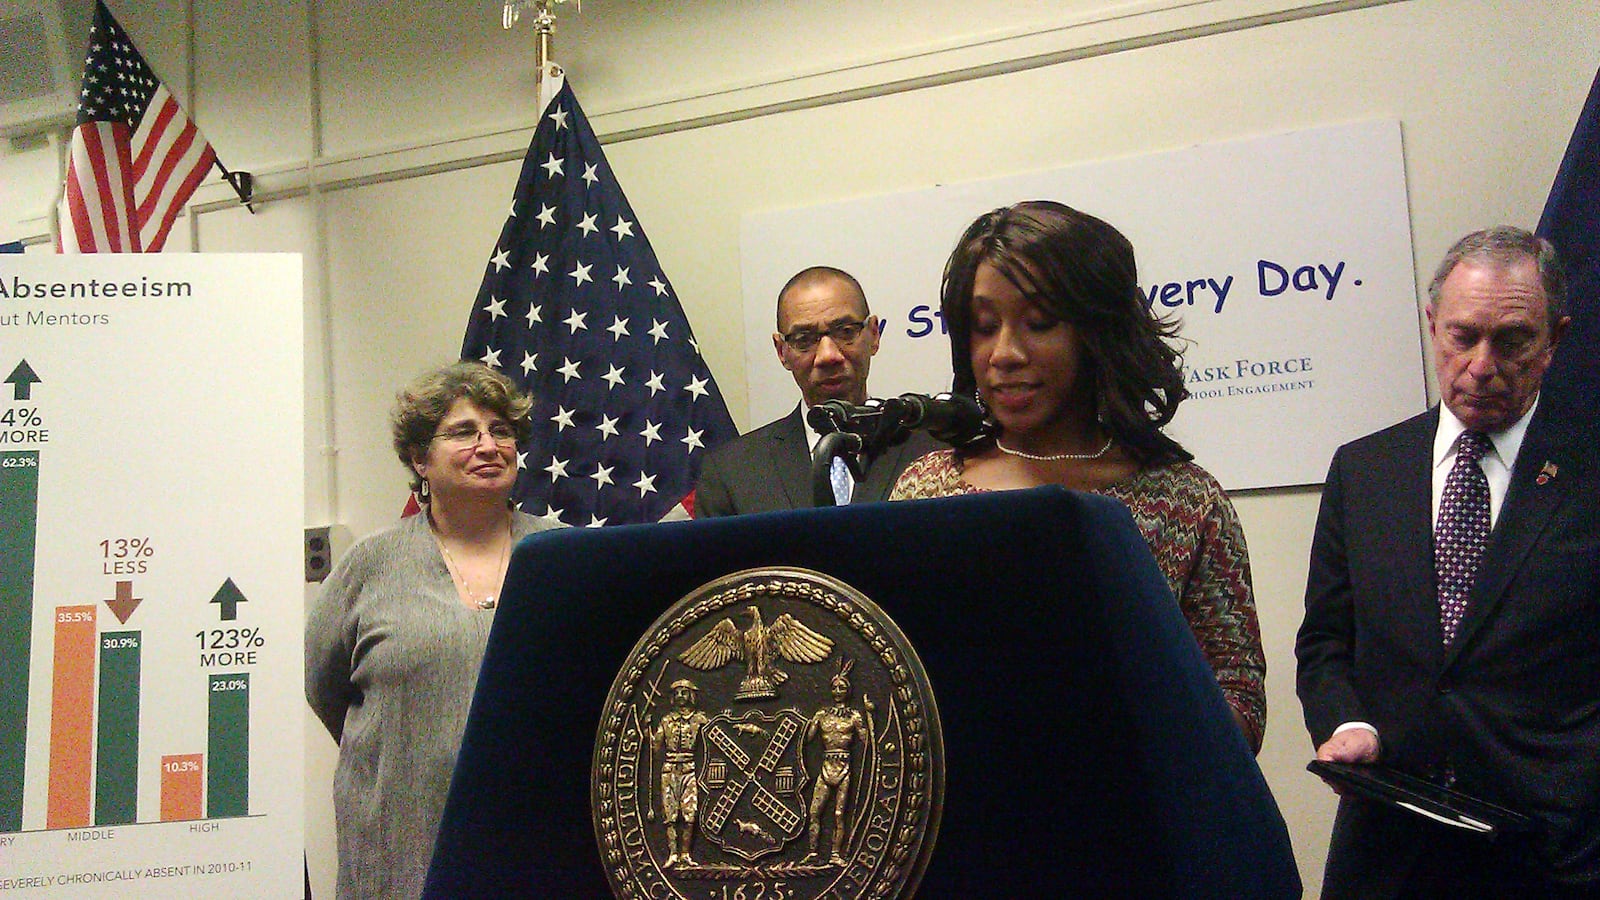 Jean Robinson, then a senior at the High School for Teaching and the Professions, spoke at a press conference touting the city's absenteeism initiative in 2011.